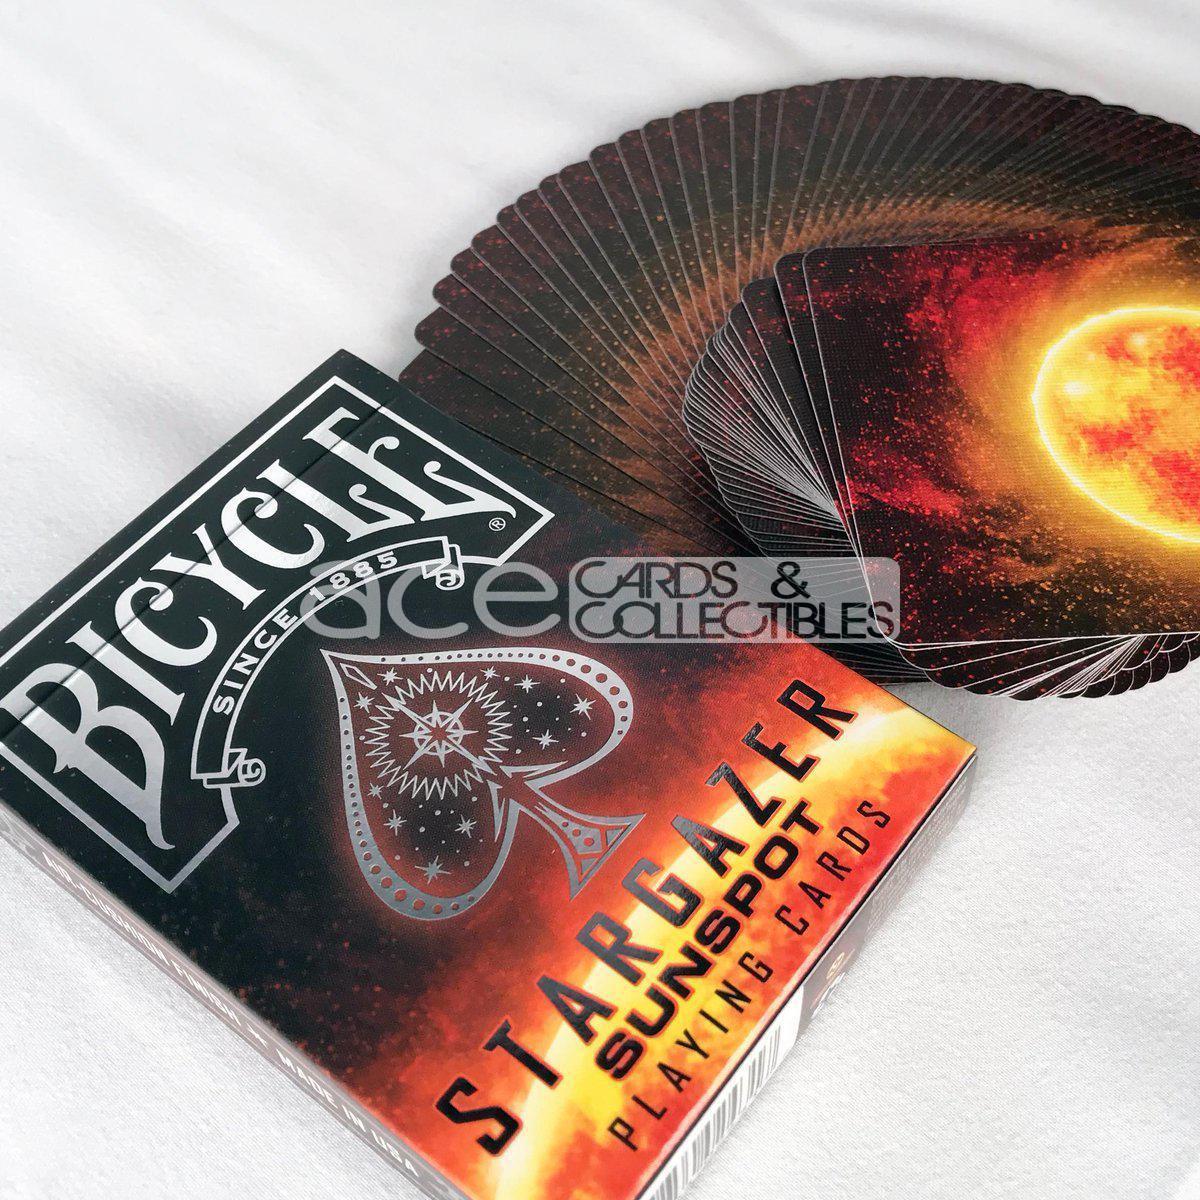 Bicycle Stargazer Sunspot Playing Cards-United States Playing Cards Company-Ace Cards & Collectibles